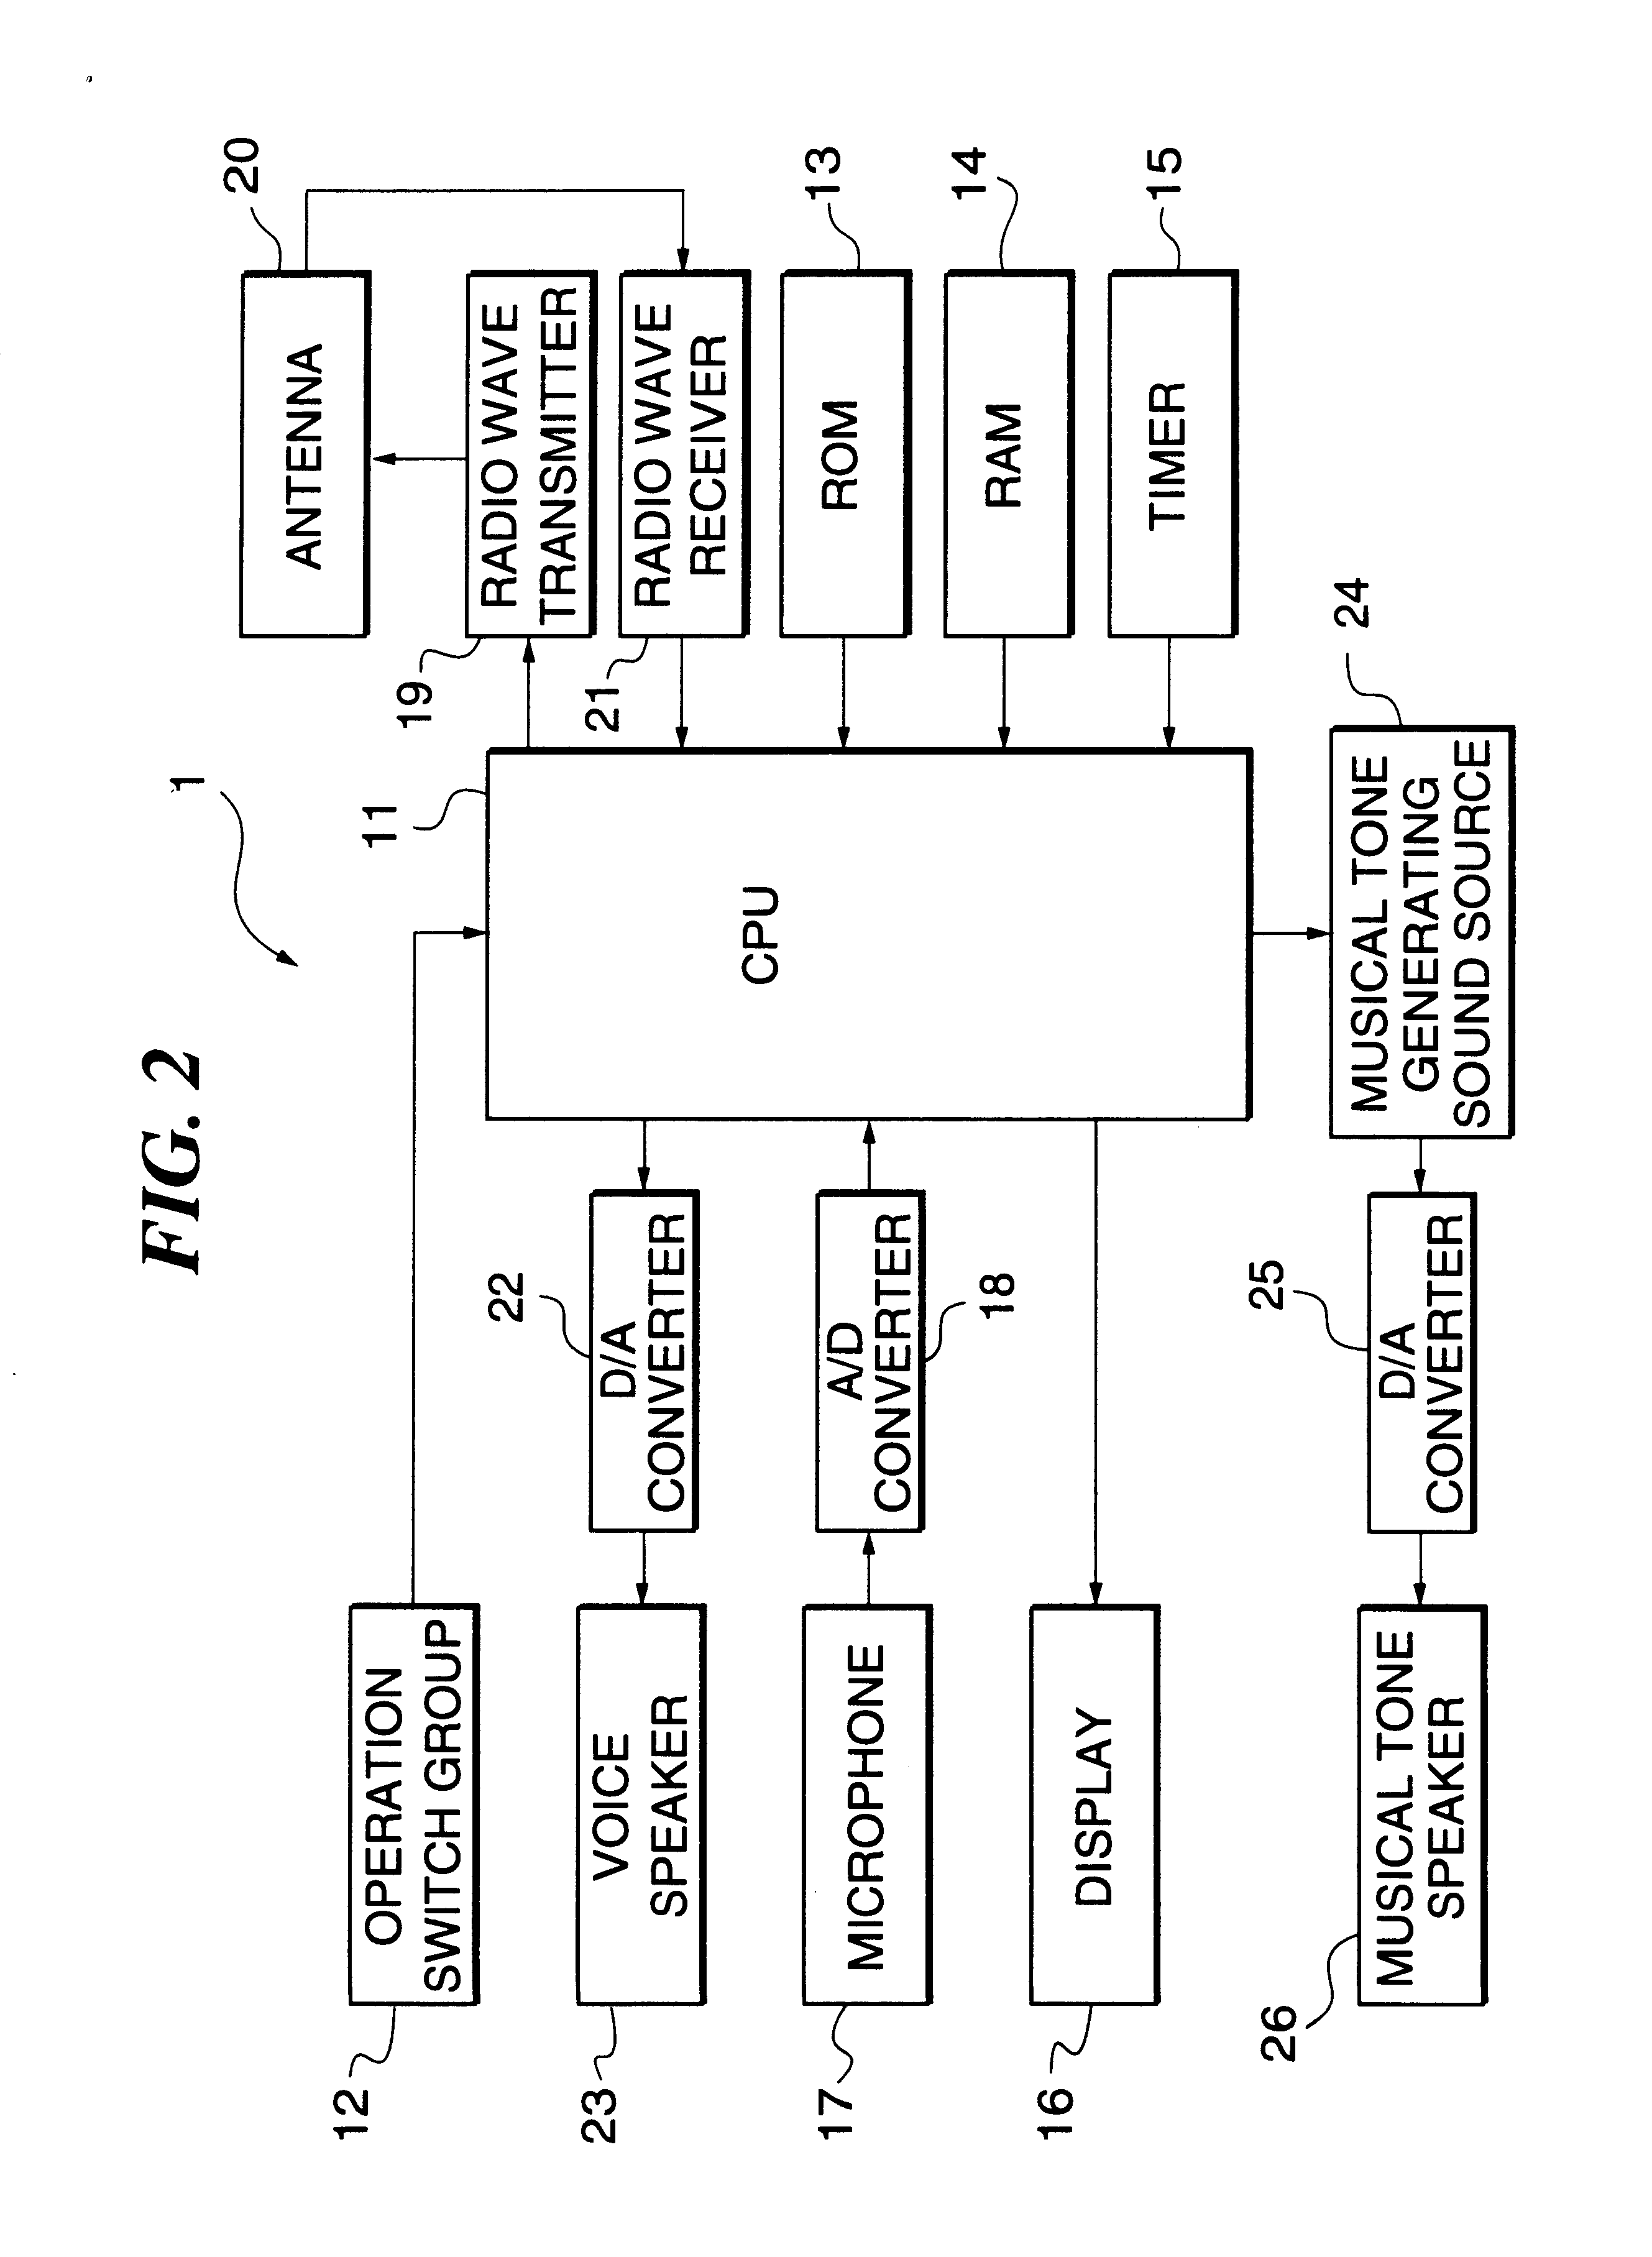 Communication apparatus, control method therefor and storage medium storing program for executing the method